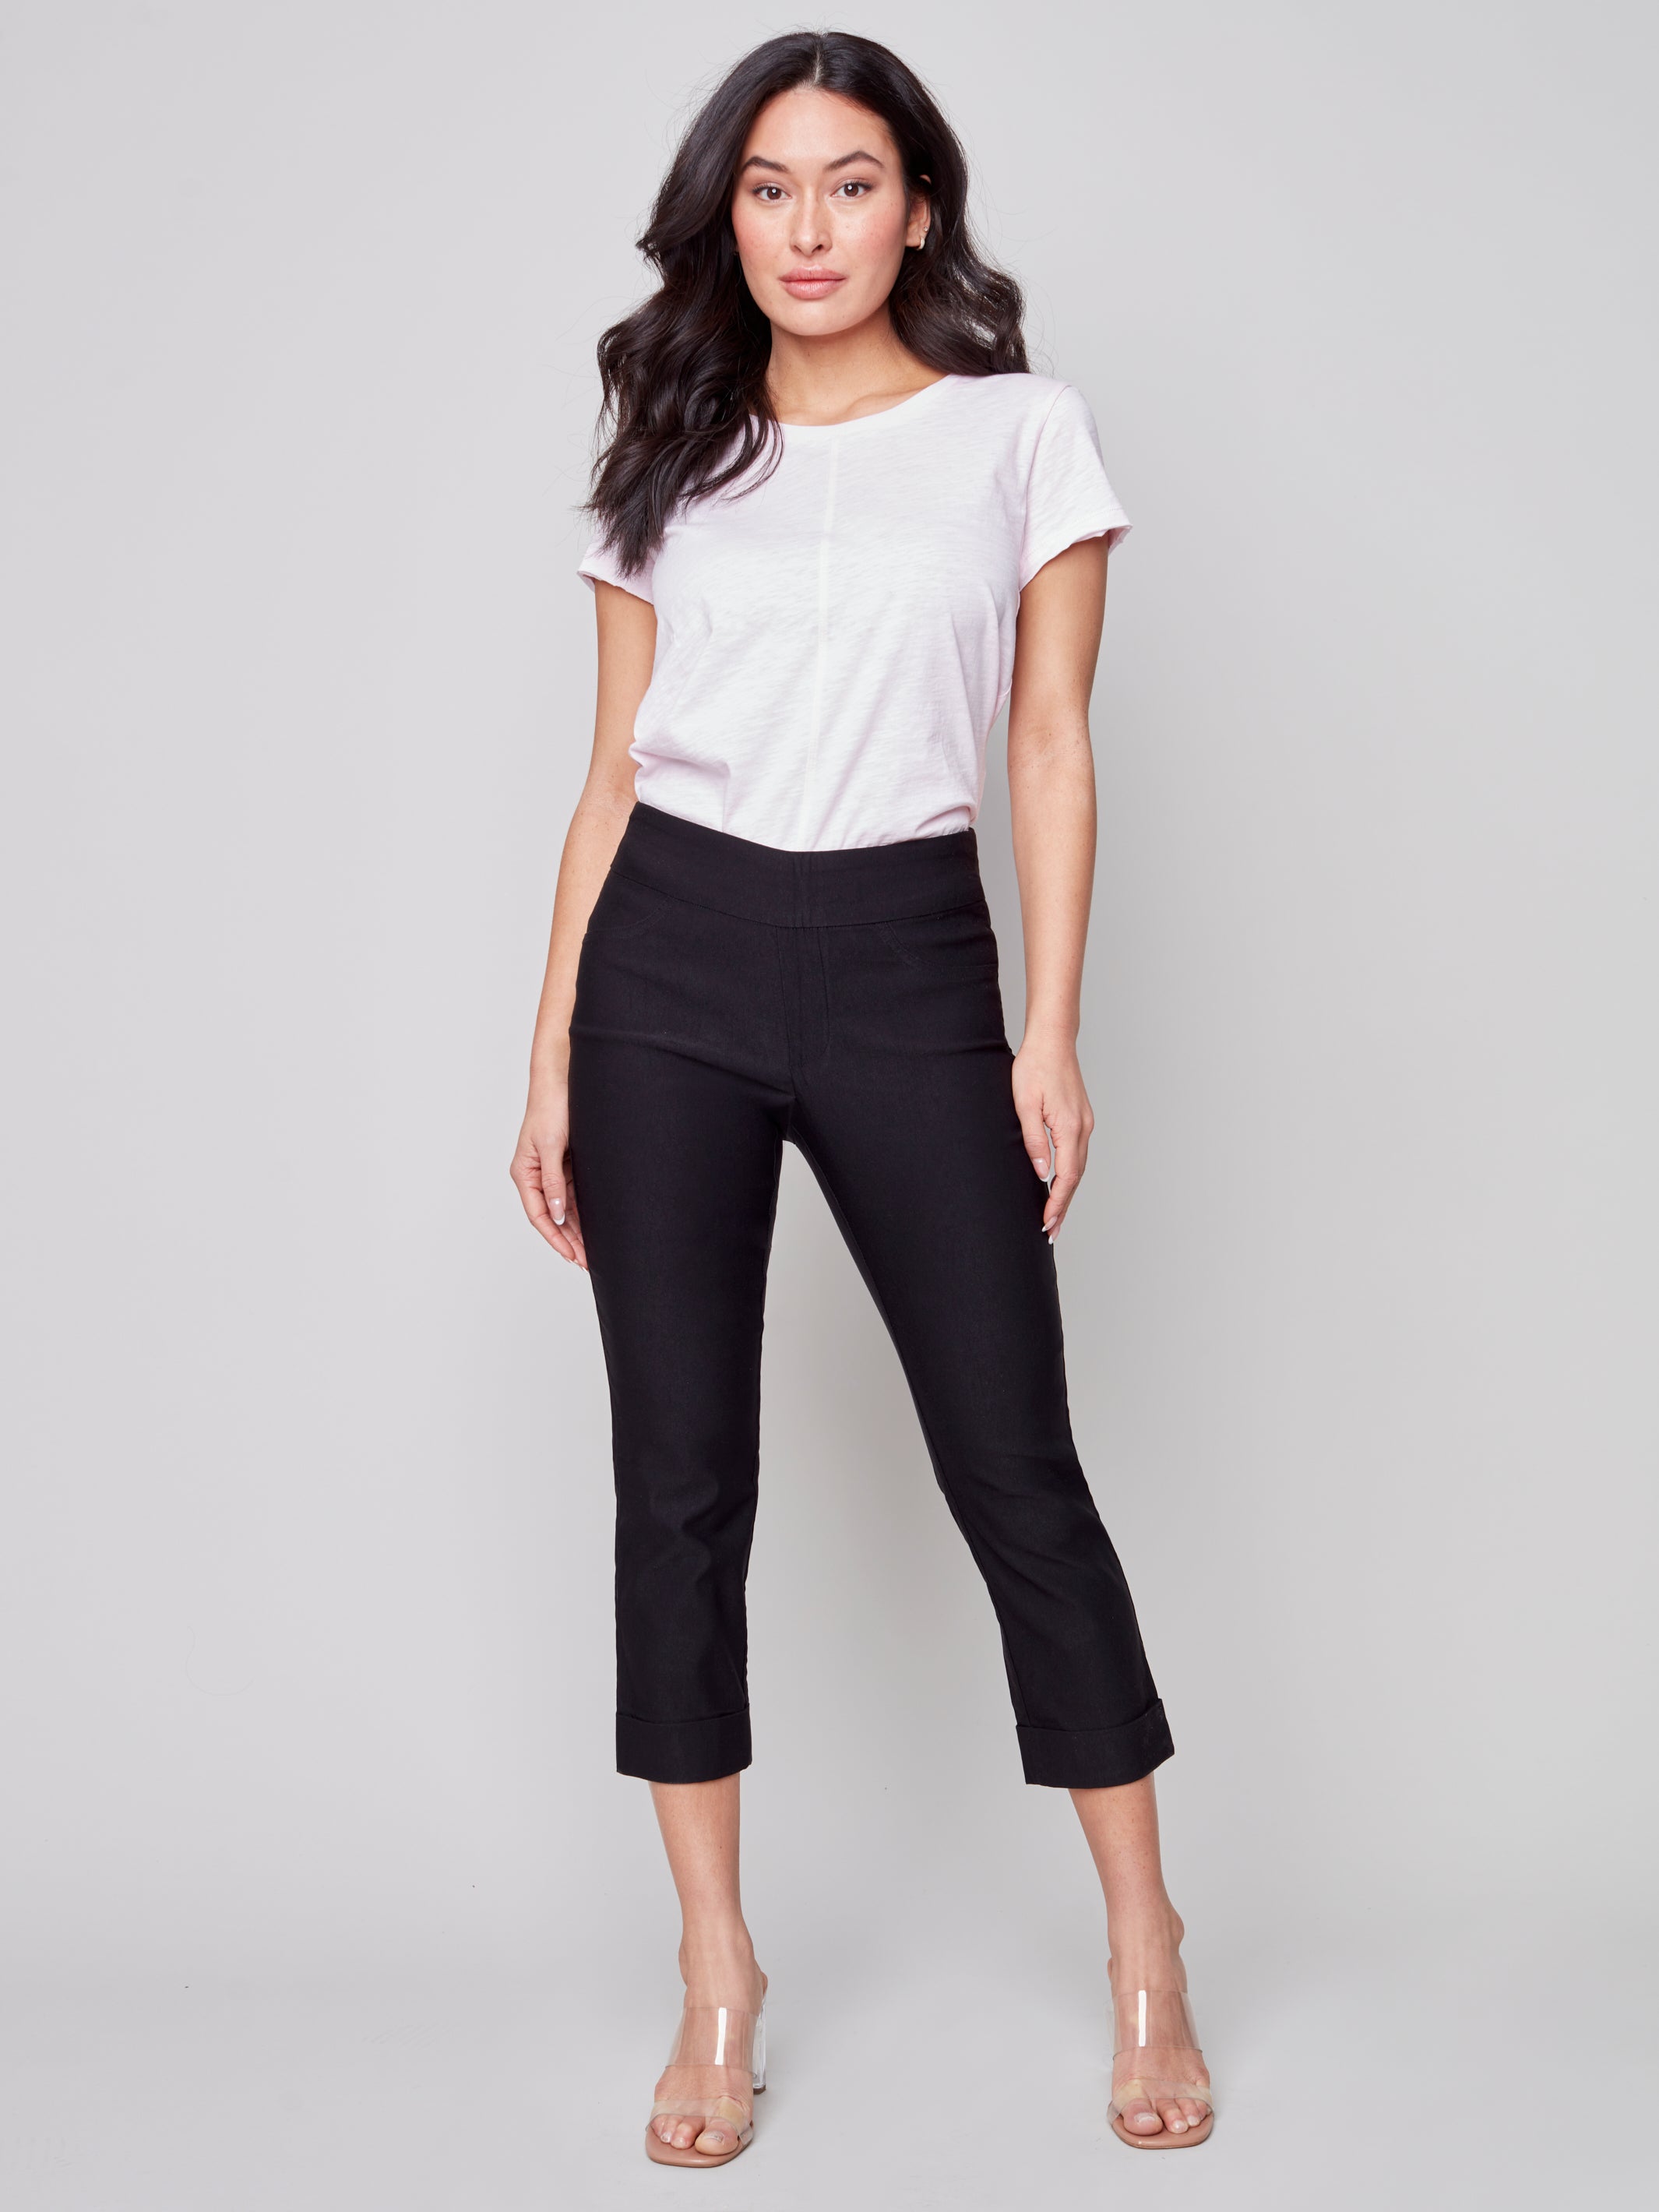 Pull On Stretch Cropped Cuffed Pant by Charlie B